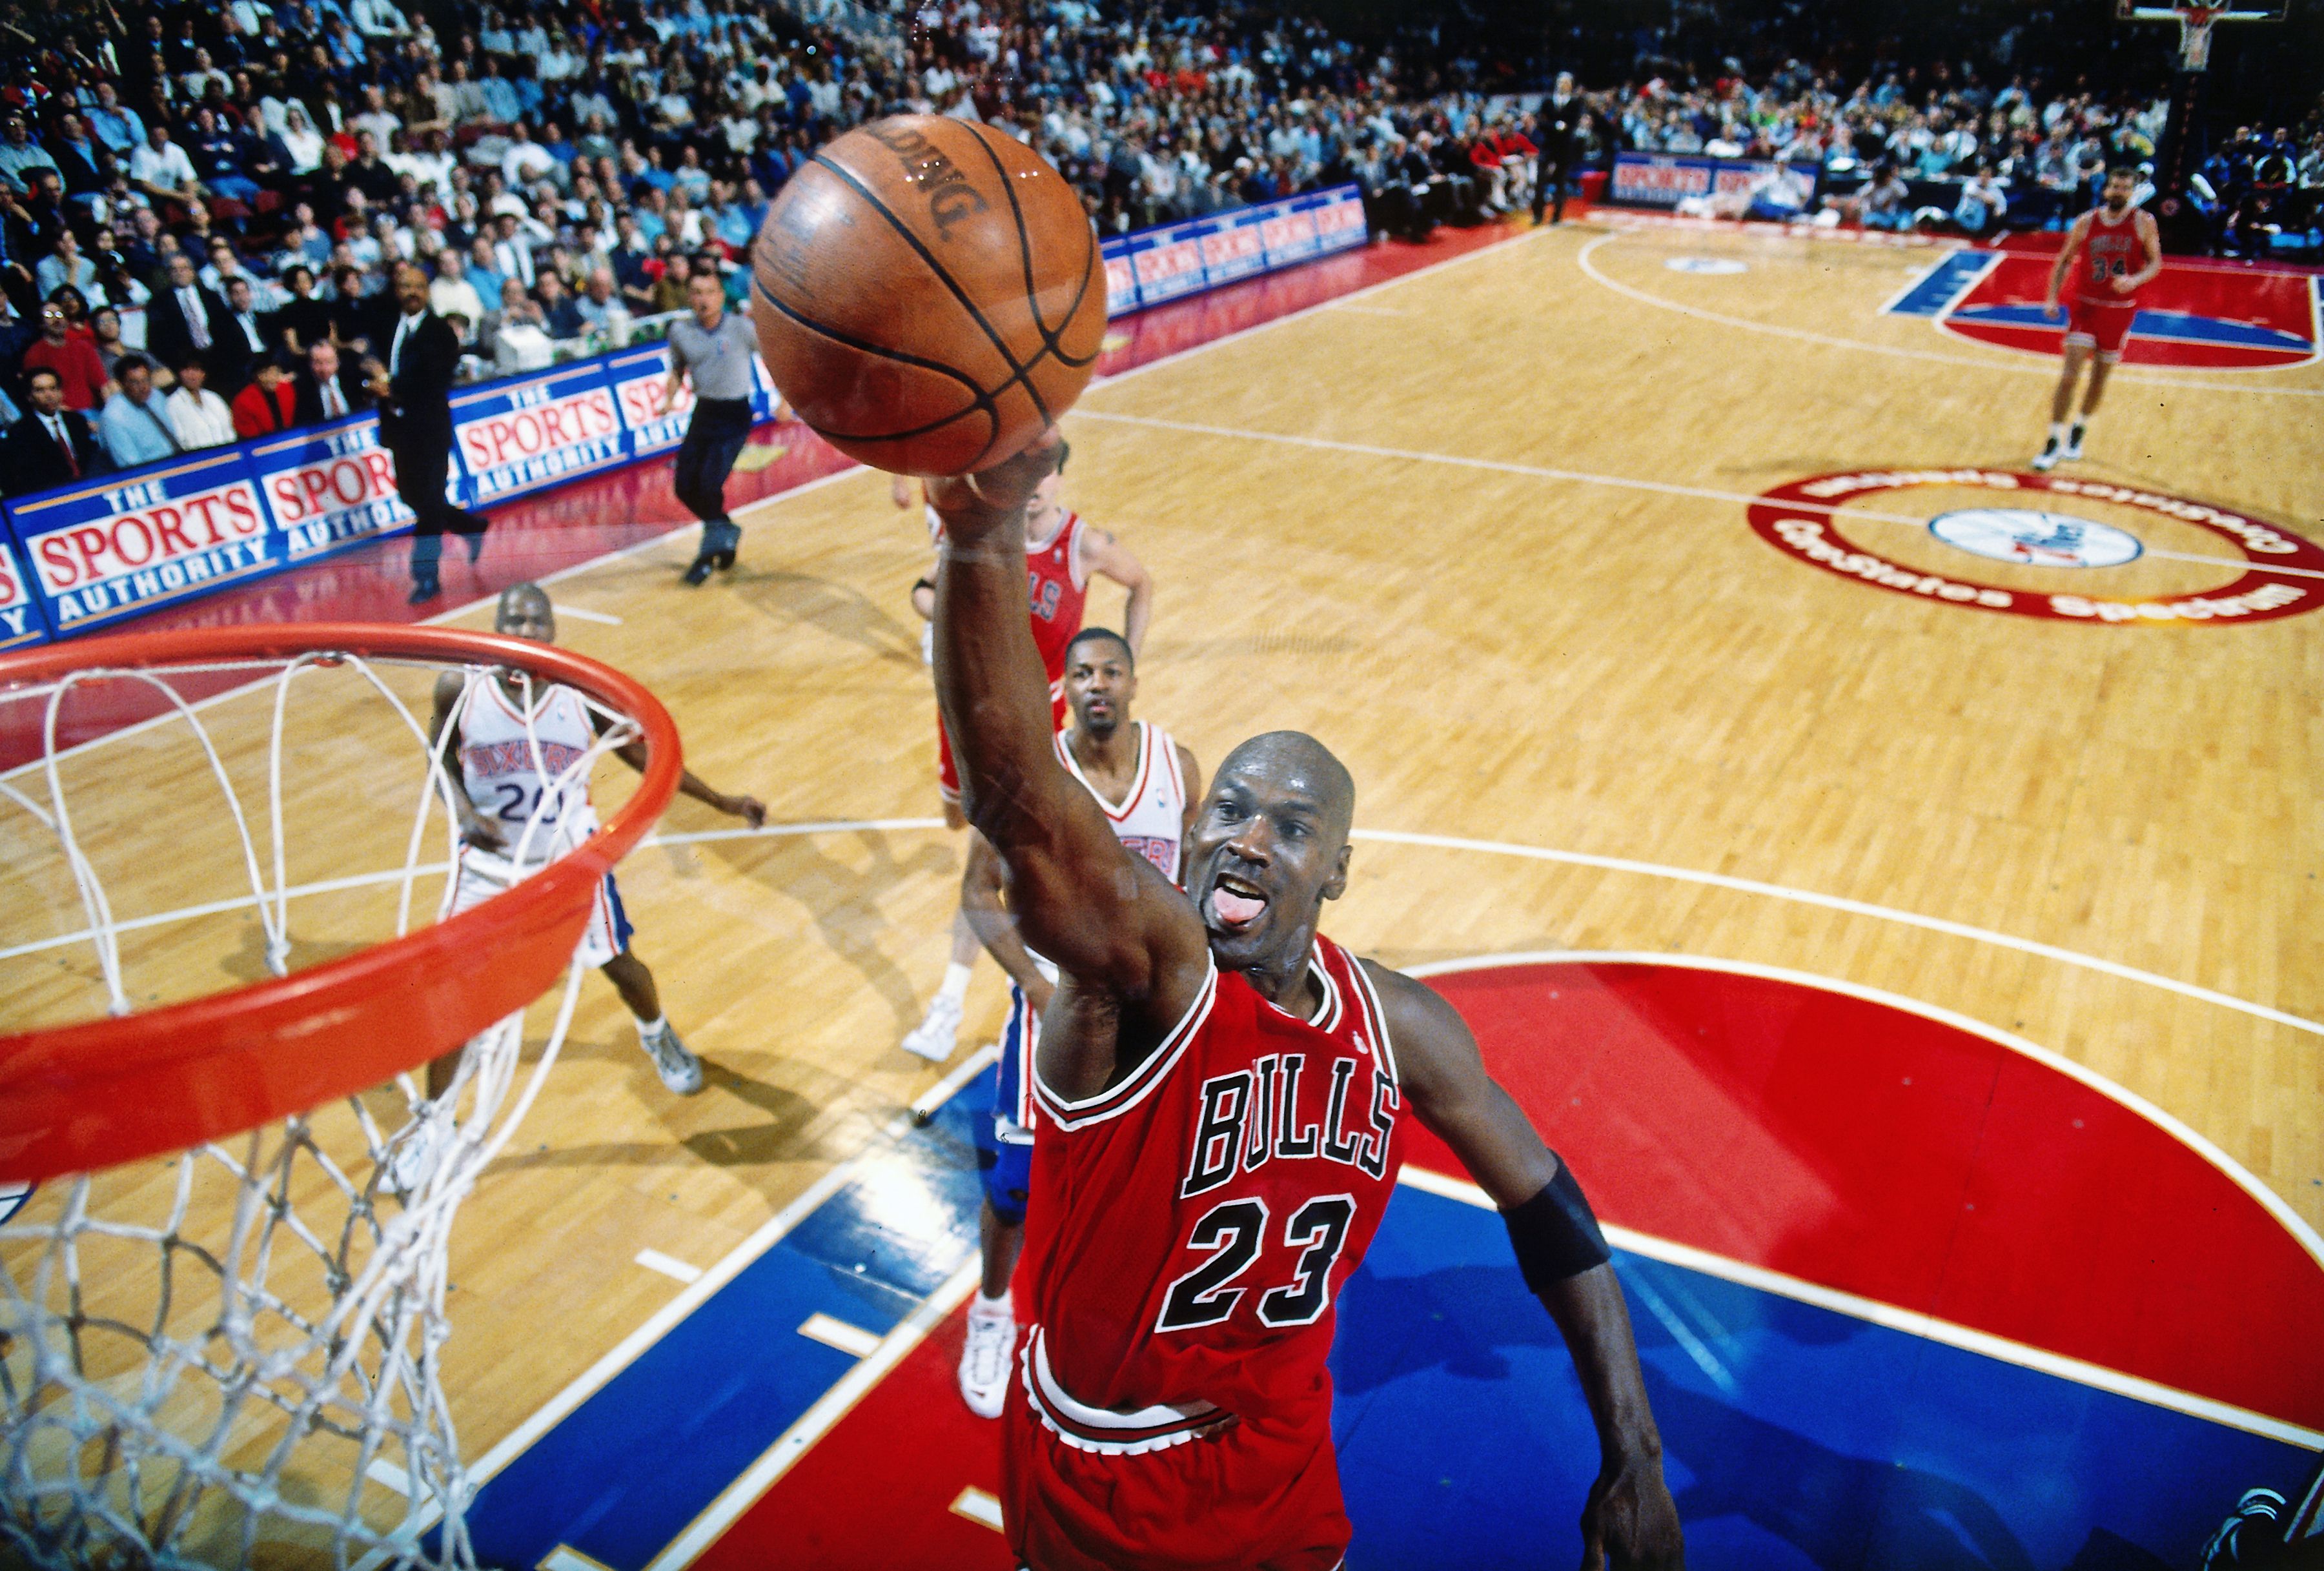  Michael Jordan #23 of the Chicago Bulls plays against the Philadelphia 76ers in 1996 | Source: Getty Images